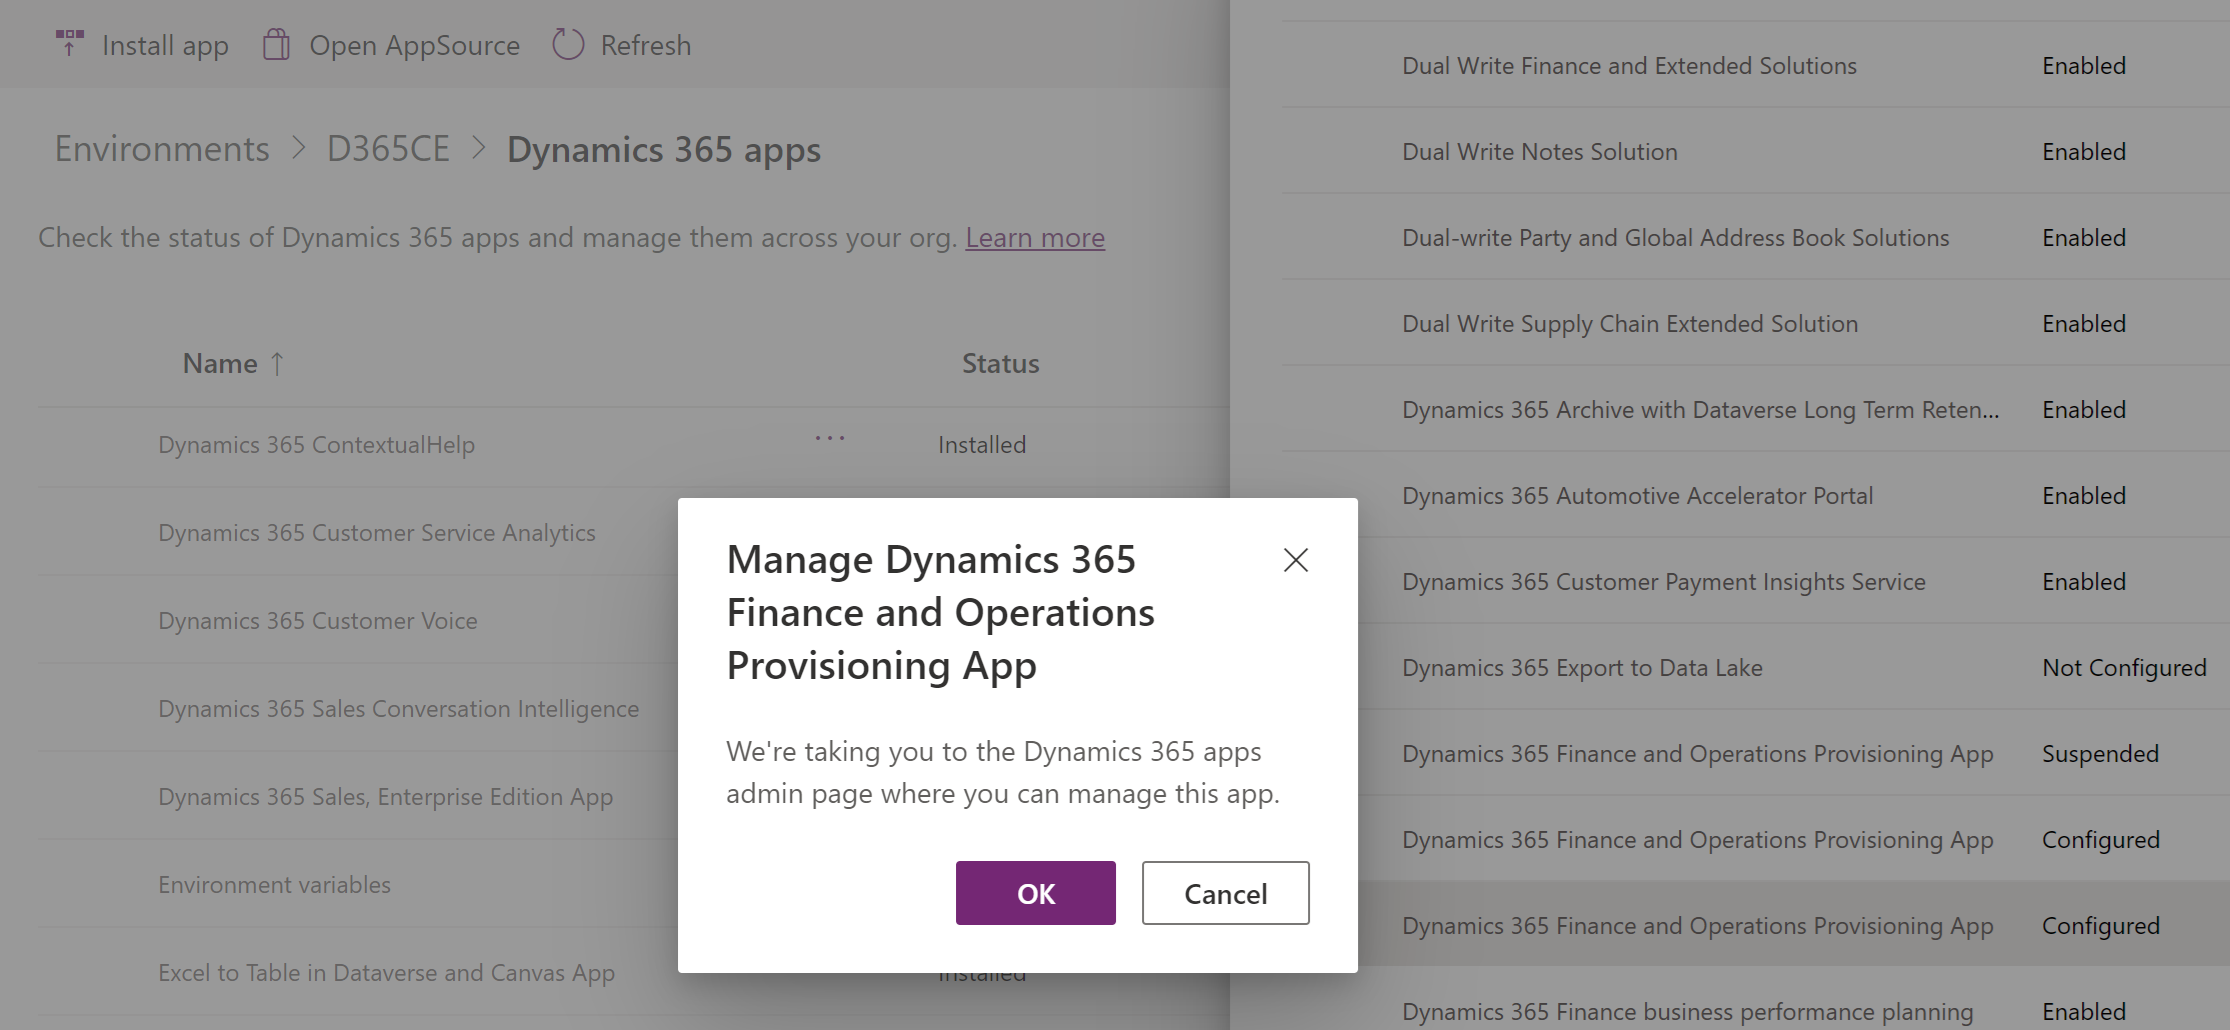 Screenshot where an entry for Dynamics 365 Finance and Operations Provisioning App that has a status of Configured is selected for installation.